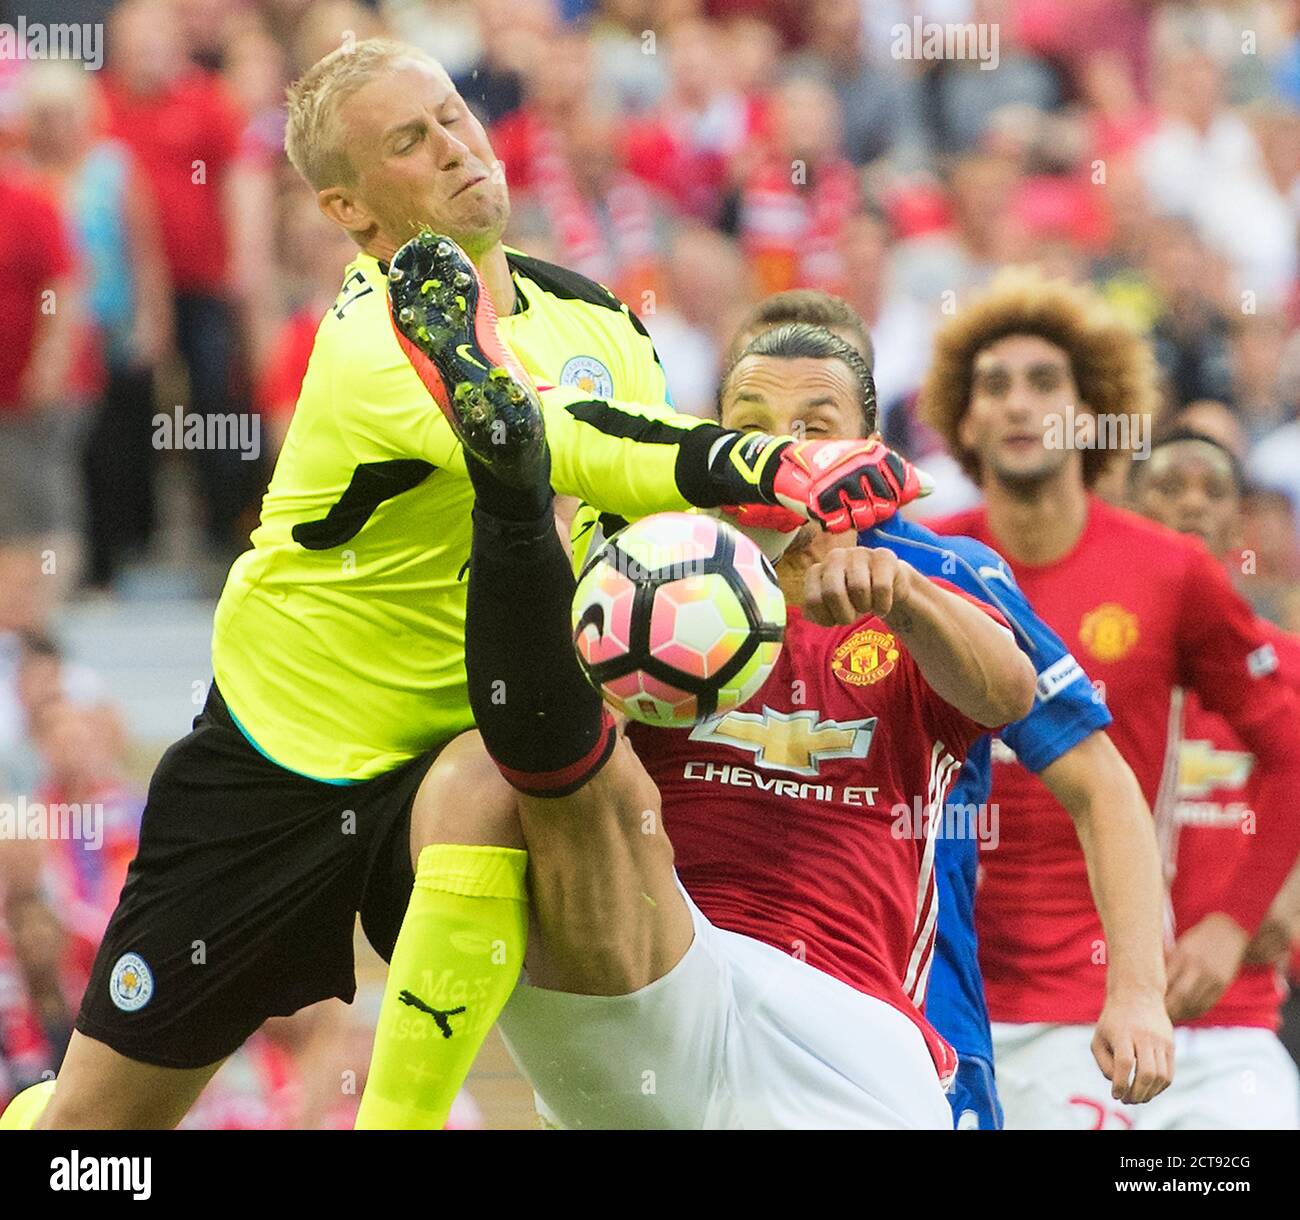 ZLATAN IBRAHIMOVIC CHALLENGES FOR THE BALL AS KASPER SCHMEICHEL CHARGES OUT TO CLEAR  LEICESTER CITY v MANCHESTER UTD THE FA COMMUNITY SHIELD - WEMBLE Stock Photo